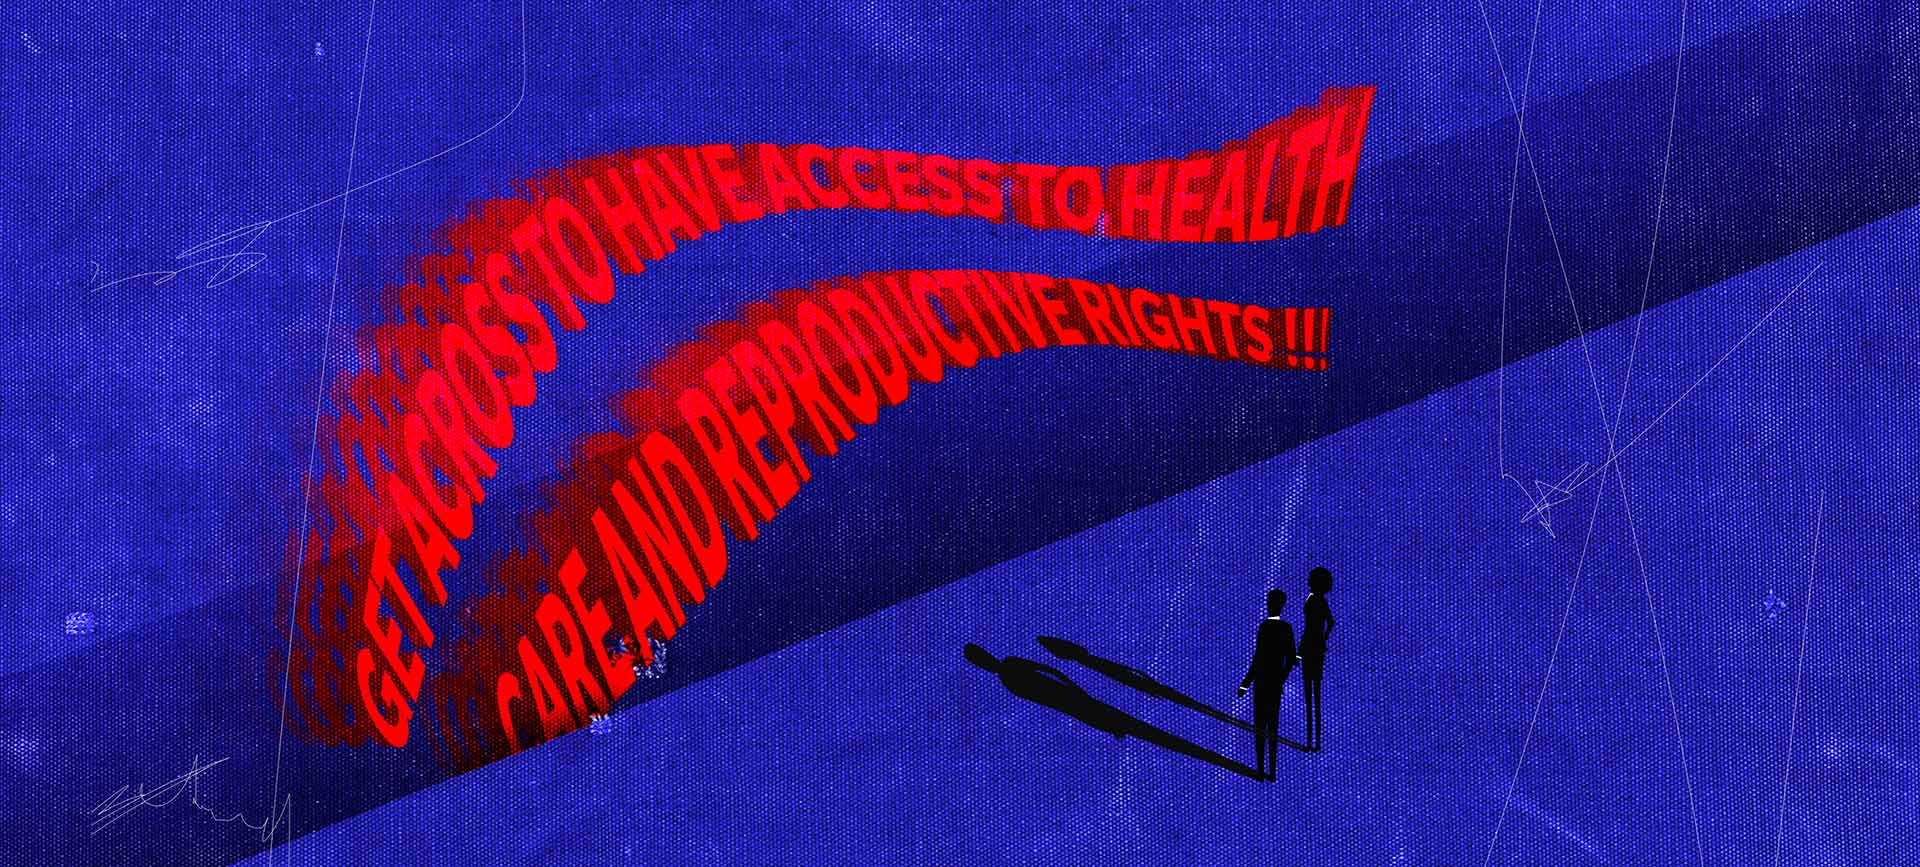 Two figures stand on the edge of a cliff as the words Get Across to Get Access to Health Care and Reproductive Rights is written on the other side in red.